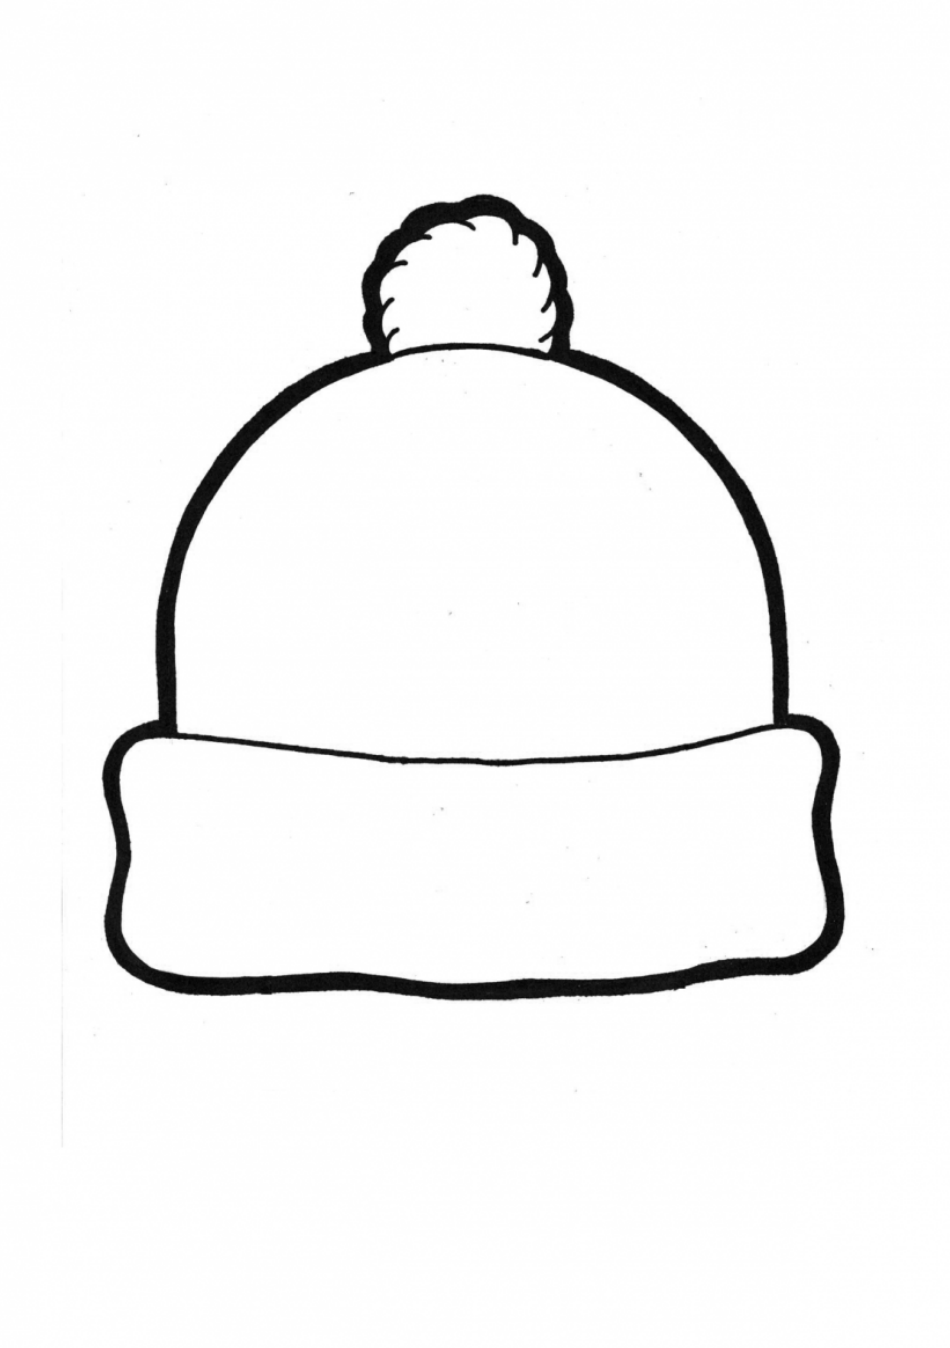 Winter cap craft template - Blank winter hat template for kids' craft projects.